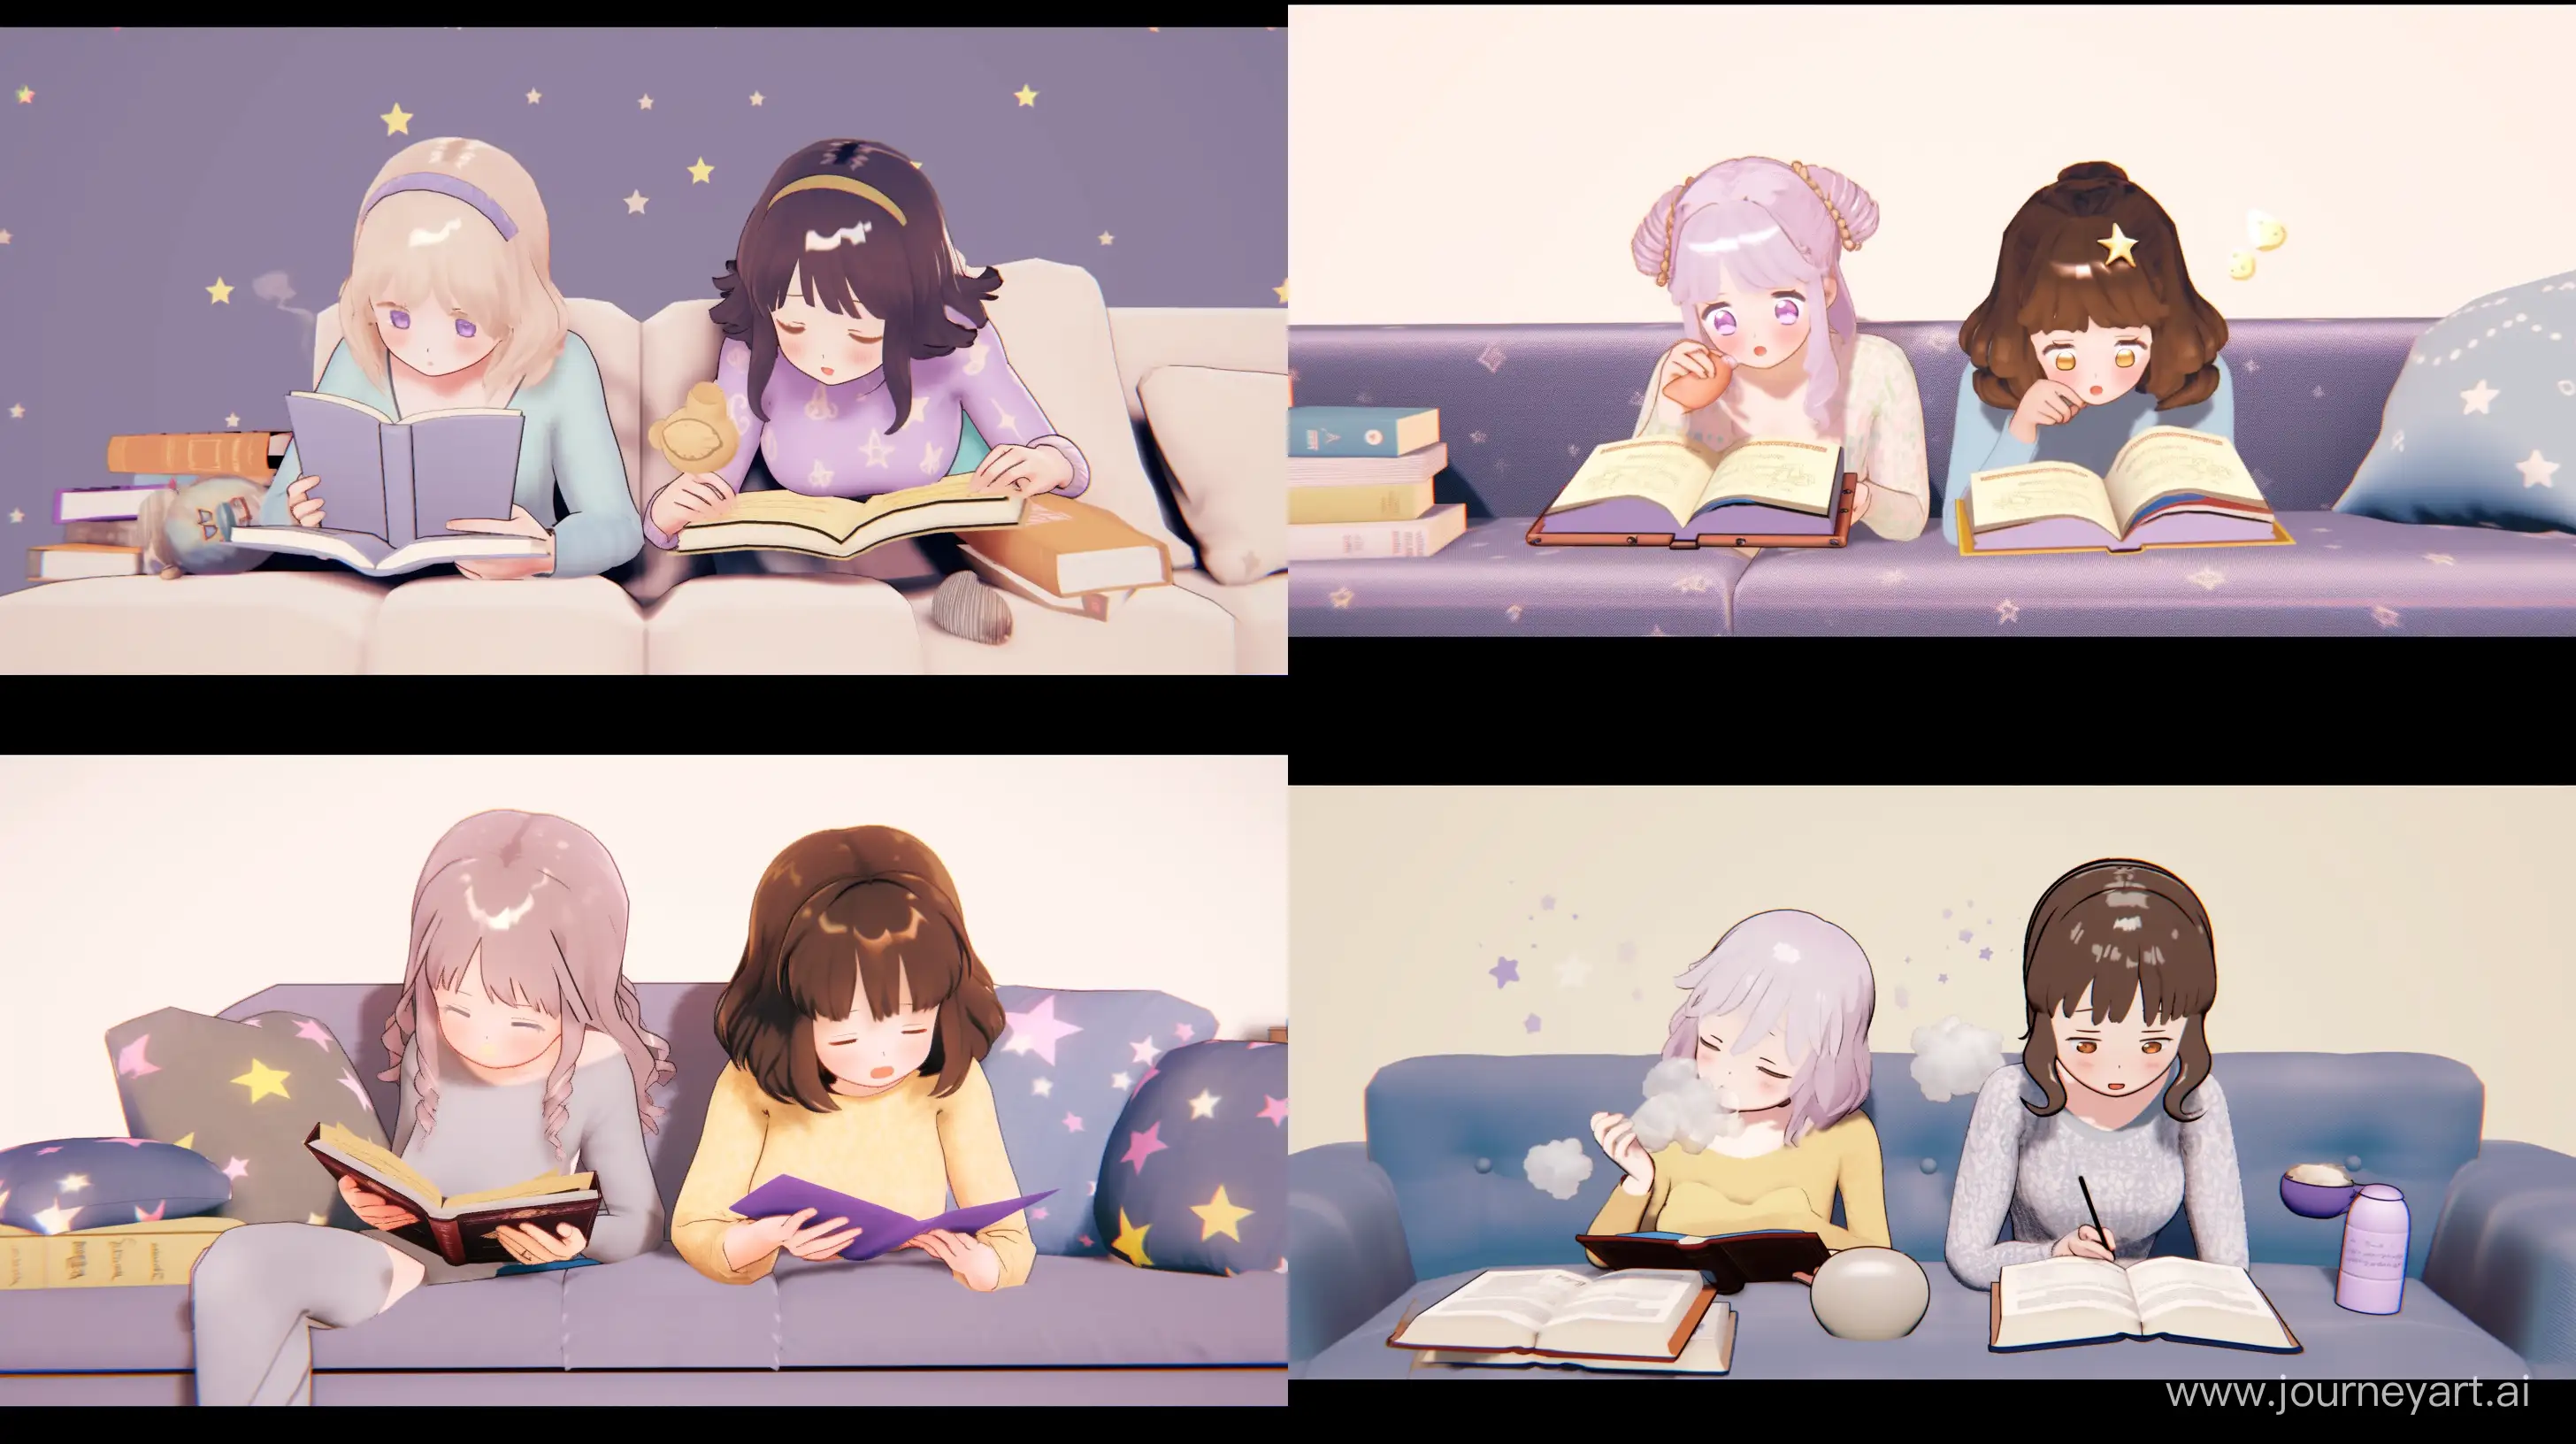 Relaxed-Anime-Scene-Reading-and-Chatting-Girls-in-Colorful-Chibi-Style